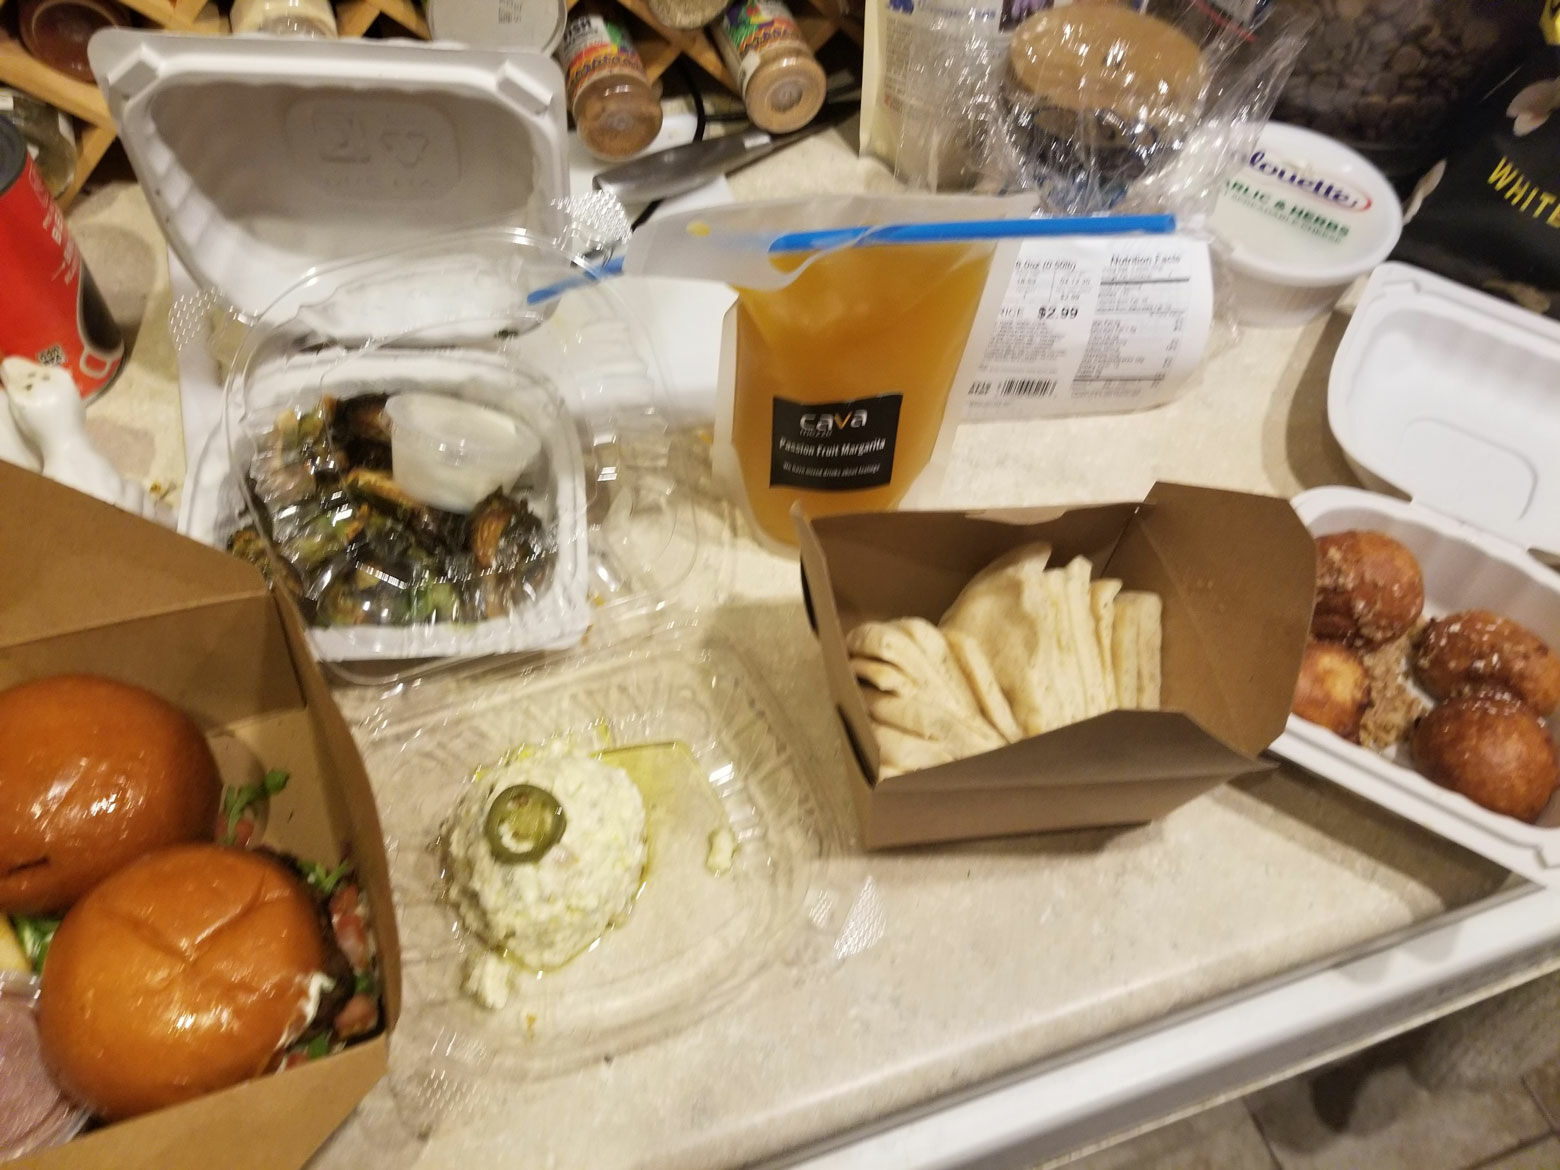 <p>Reader Rebecca Didio in D.C. said she ordered this meal from <a href="http://www.cavamezze.com/order-online" target="_blank" rel="noopener">Cava Mezze</a> on Capitol Hill via DoorDash. It cost about $80 including tax, service fee and tip. &#8220;From left to right, it&#8217;s lamb sliders, Brussels sprouts, crazy feta with pita, passion fruit margarita, and they threw in some Greek doughnut holes for free!&#8221; she wrote.</p>
